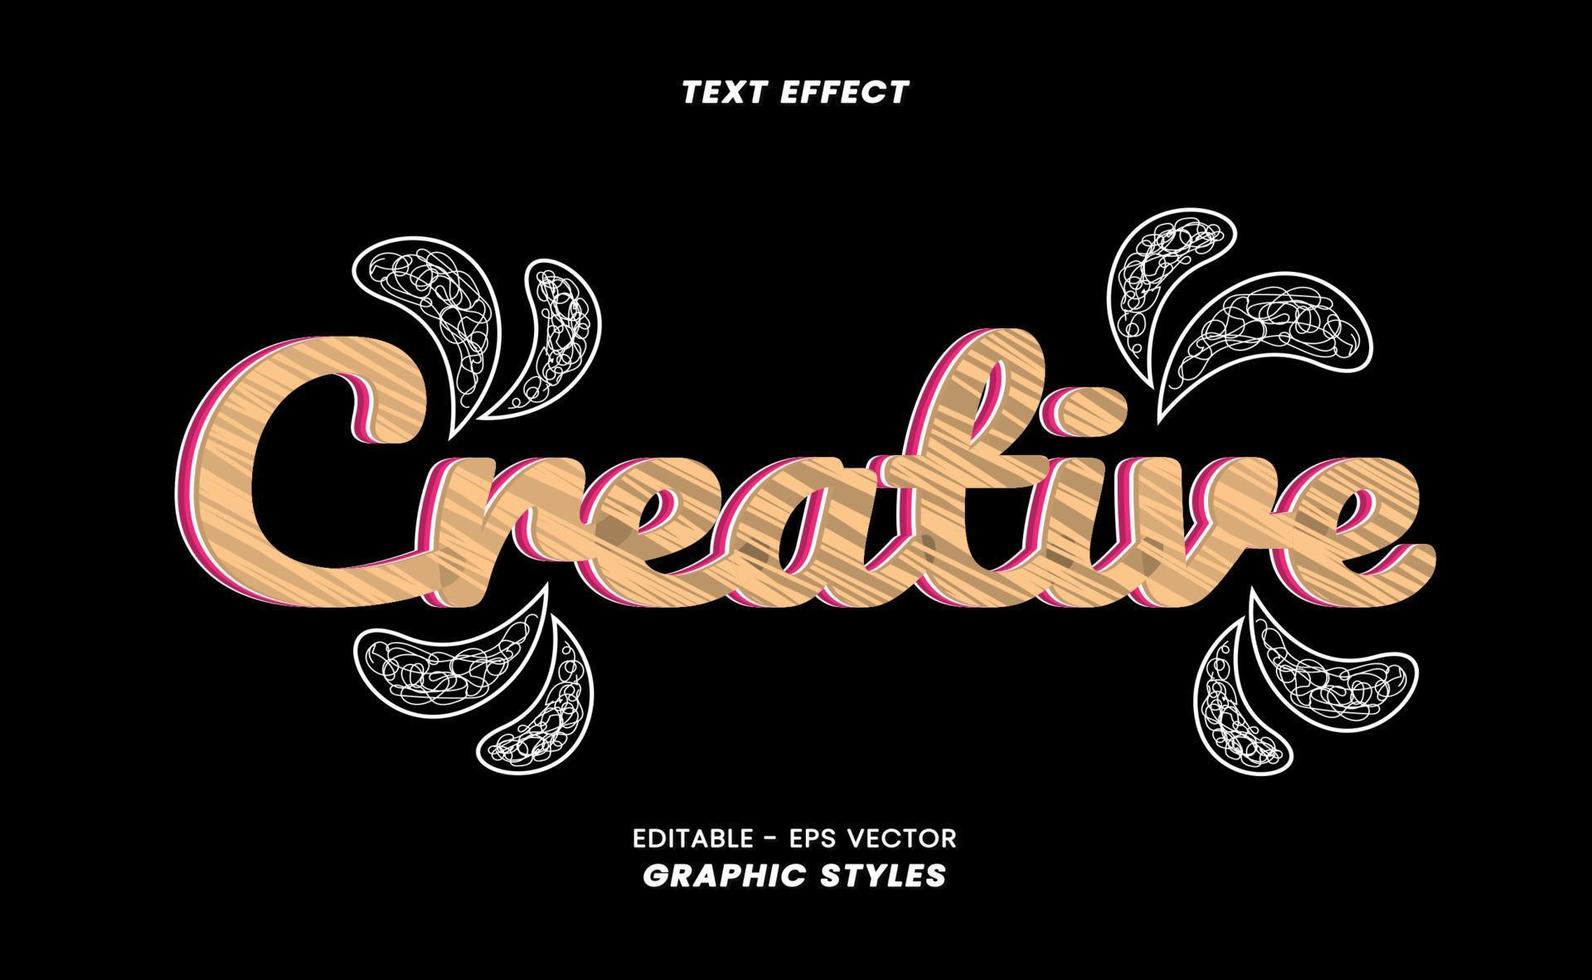 Creative Text Effect with Background. Effects can be used in Graphic Style settings Suitable for use as Title vector